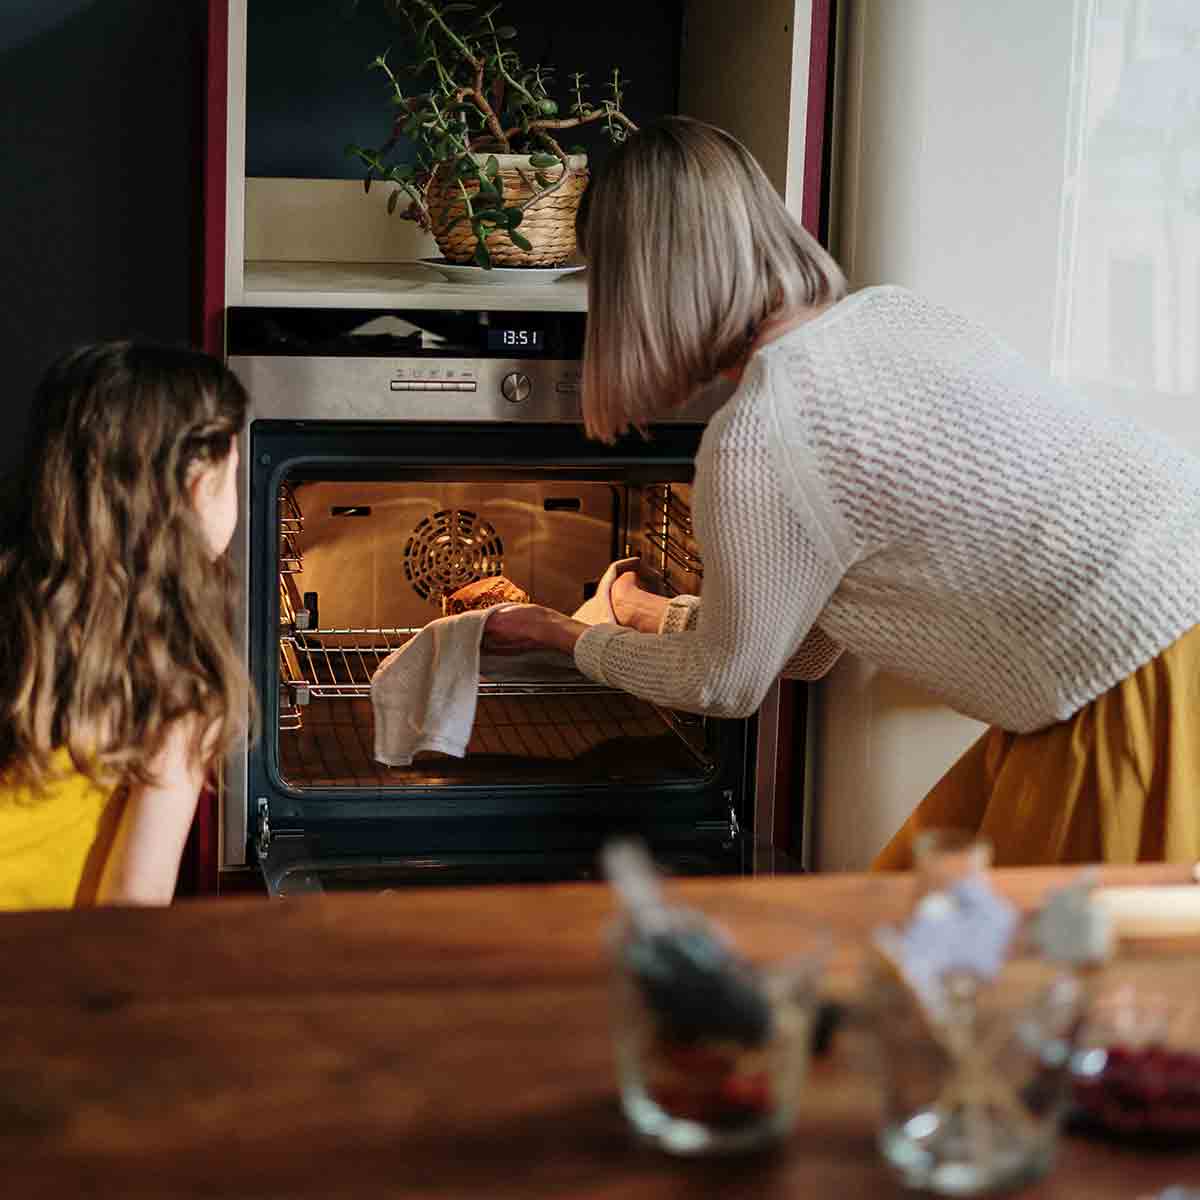 A Woman Removing Something From The Oven